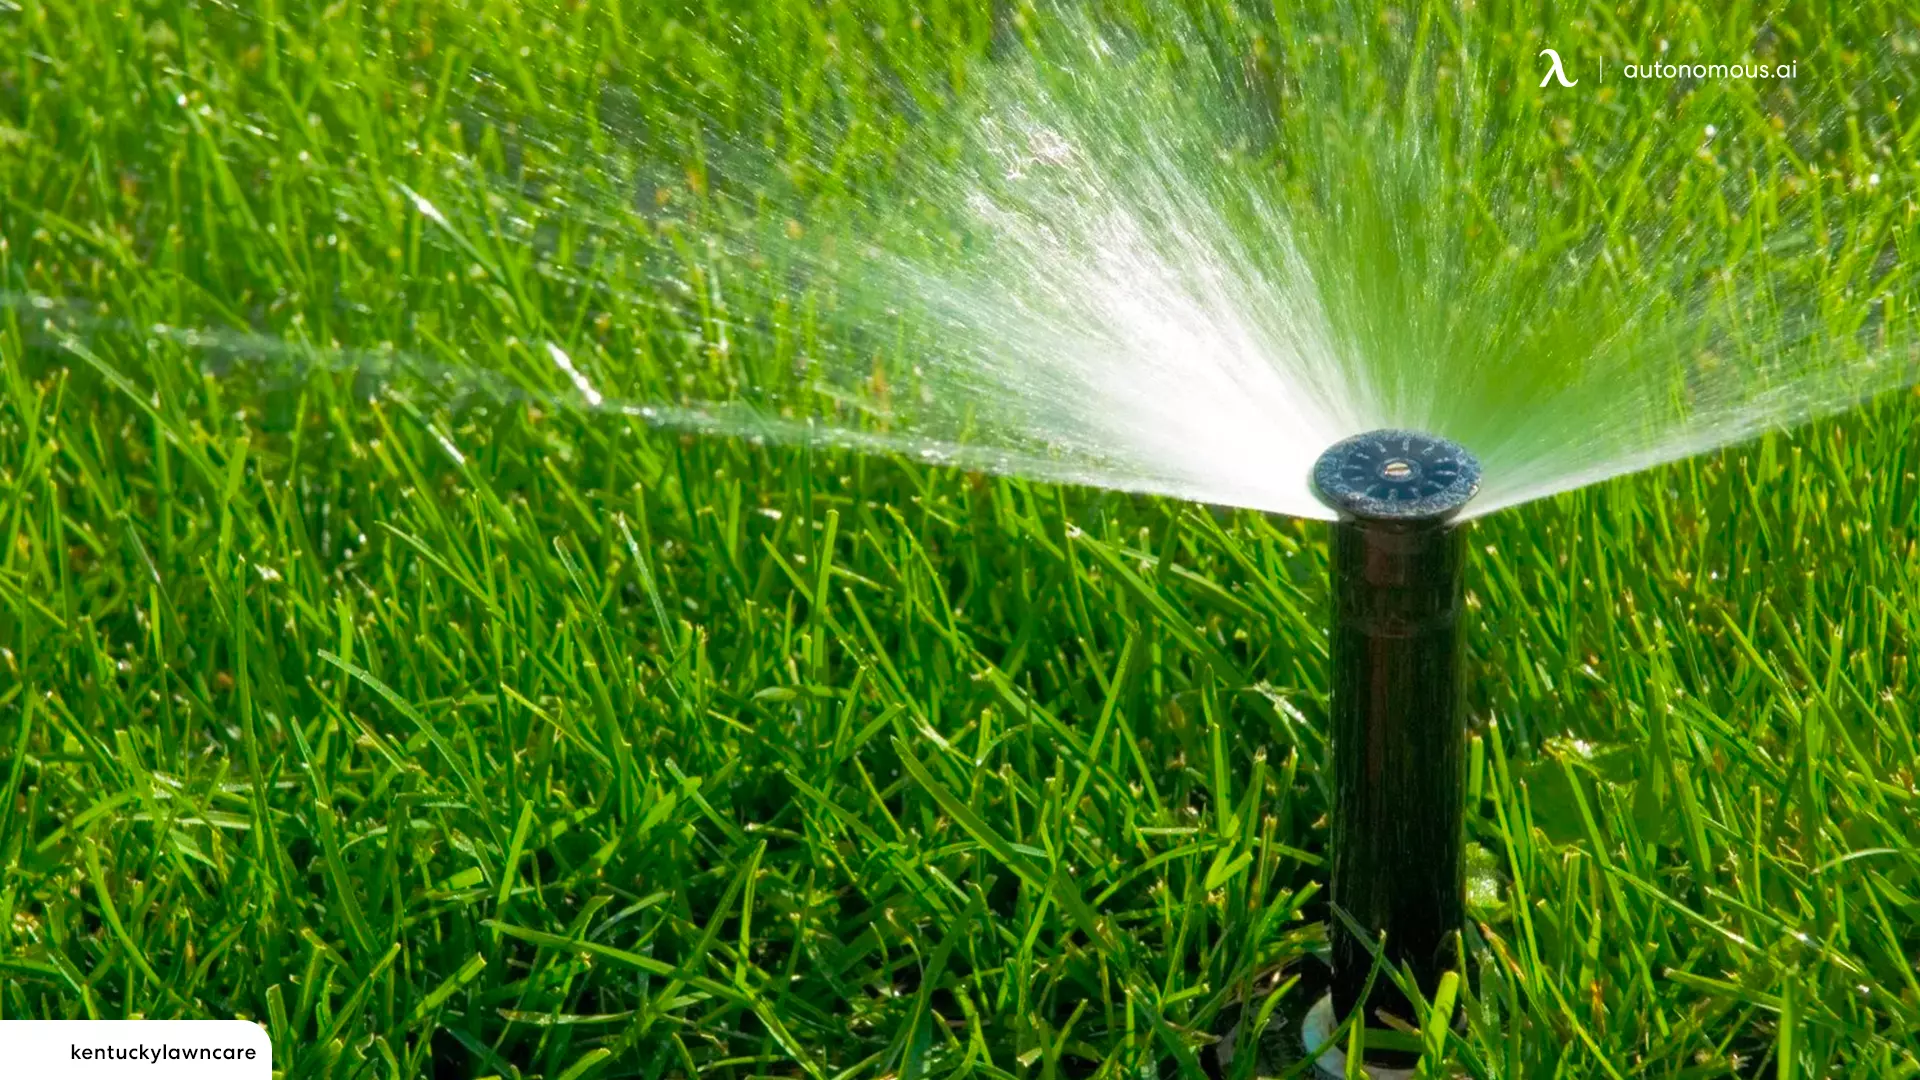 Sprinklers that Are Automated